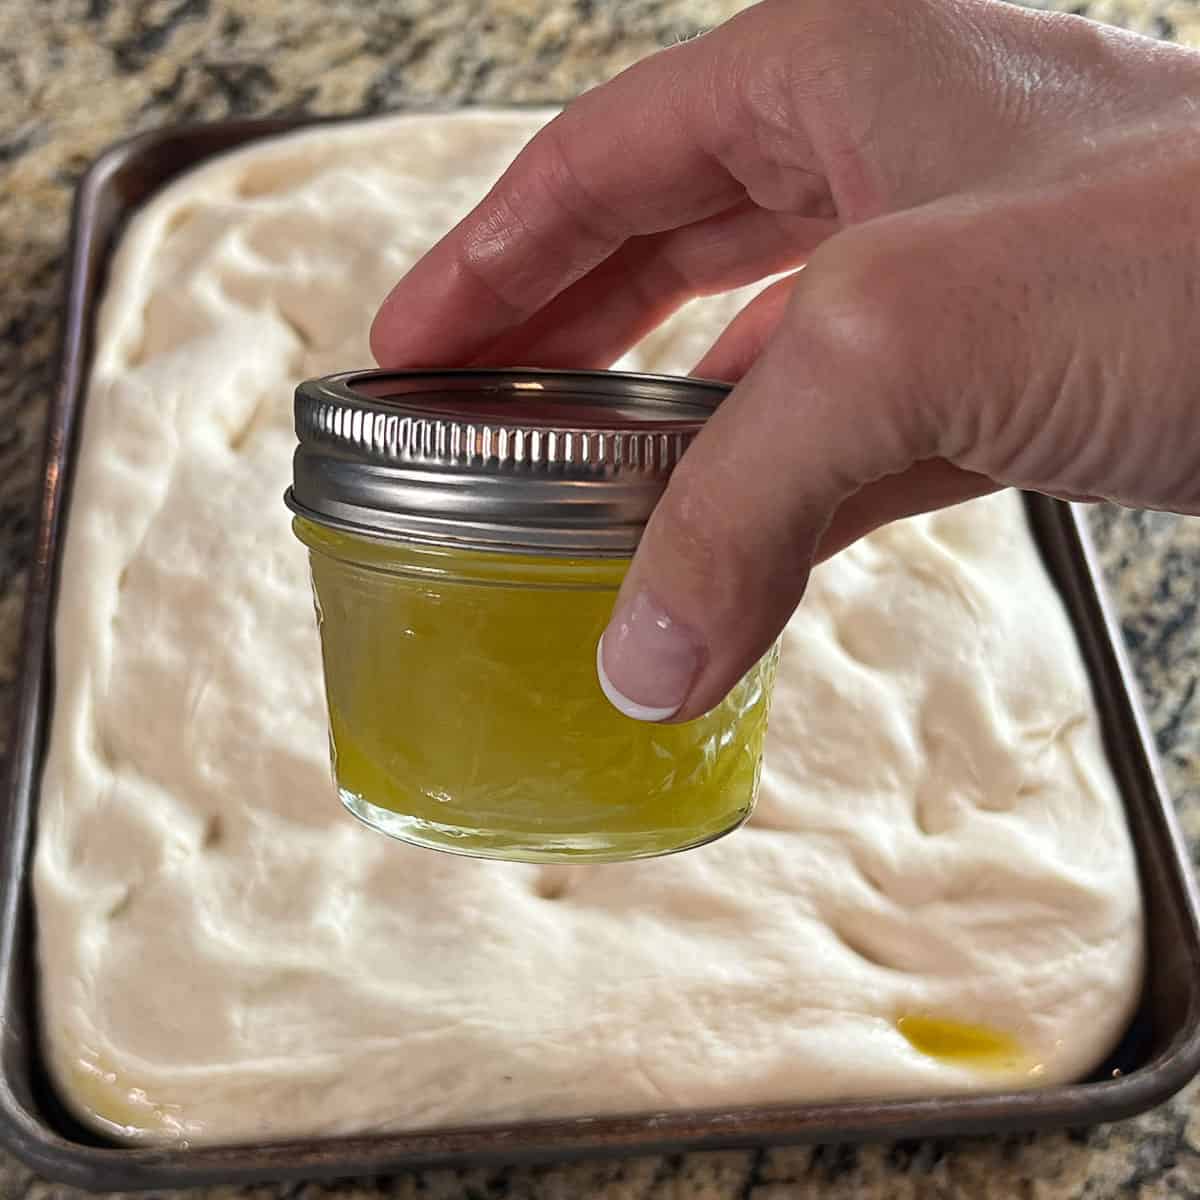 Image showing olive oil and water emulsion for focaccia.